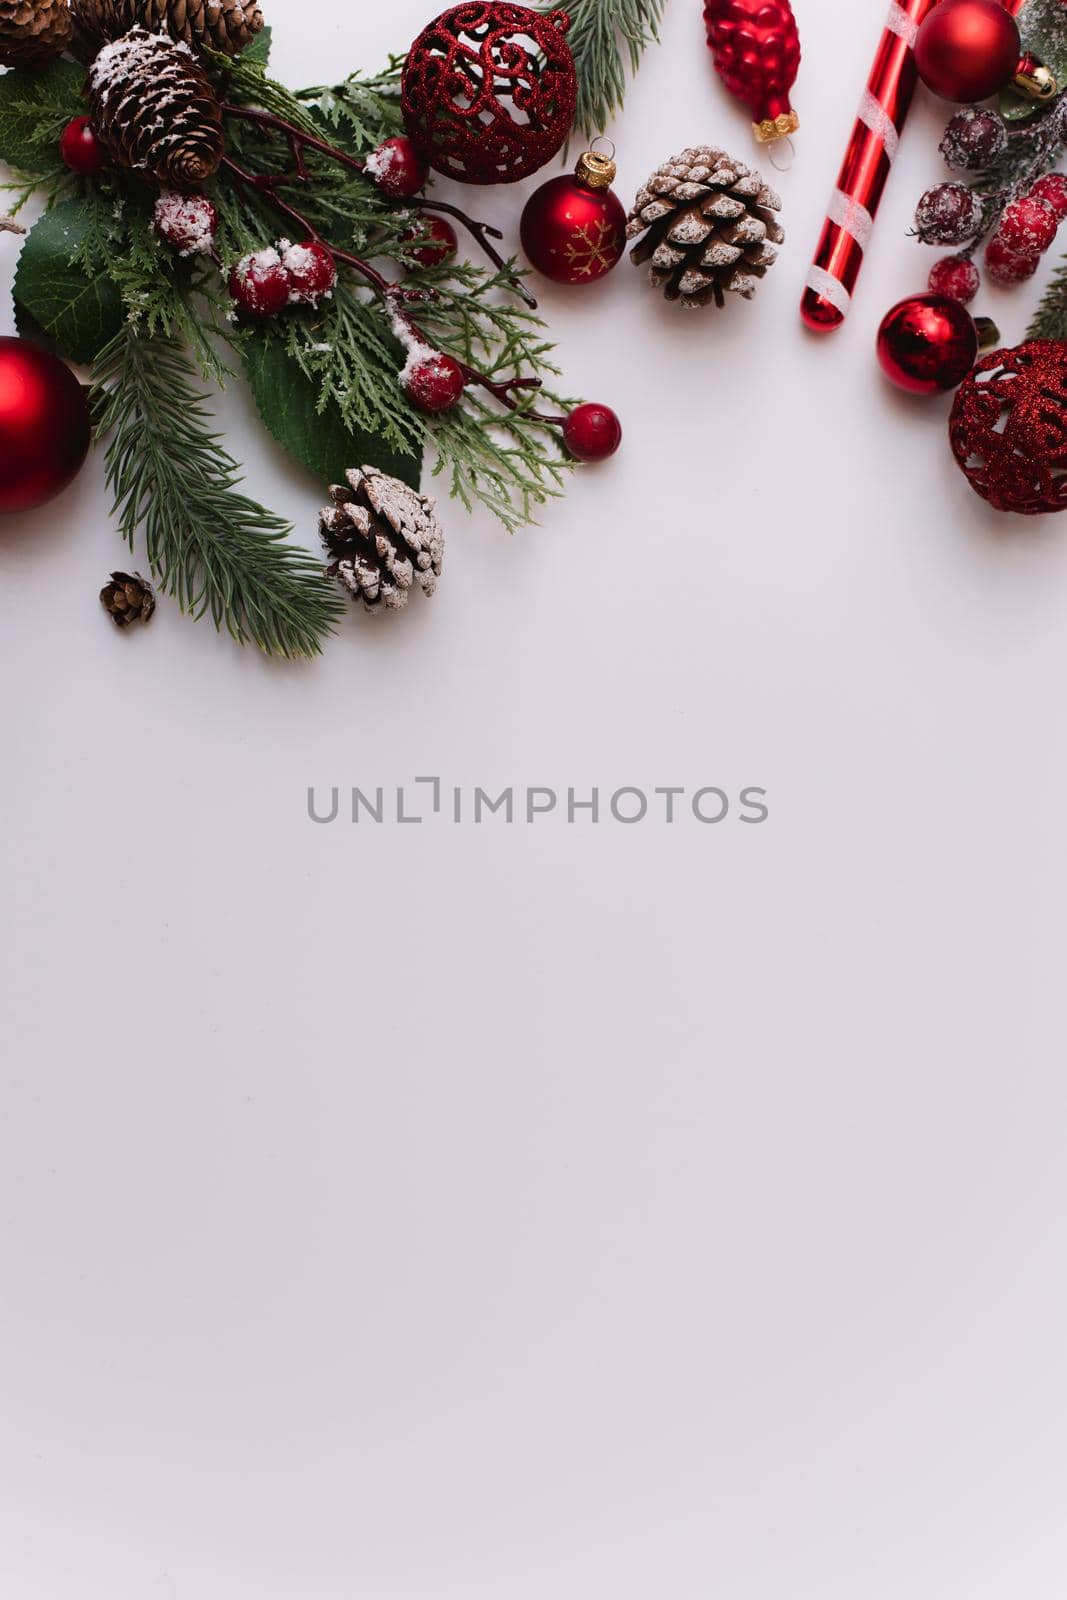 Fir branch with Christmas red decorations and balls on a white background with copy space for text. Vertical photo.